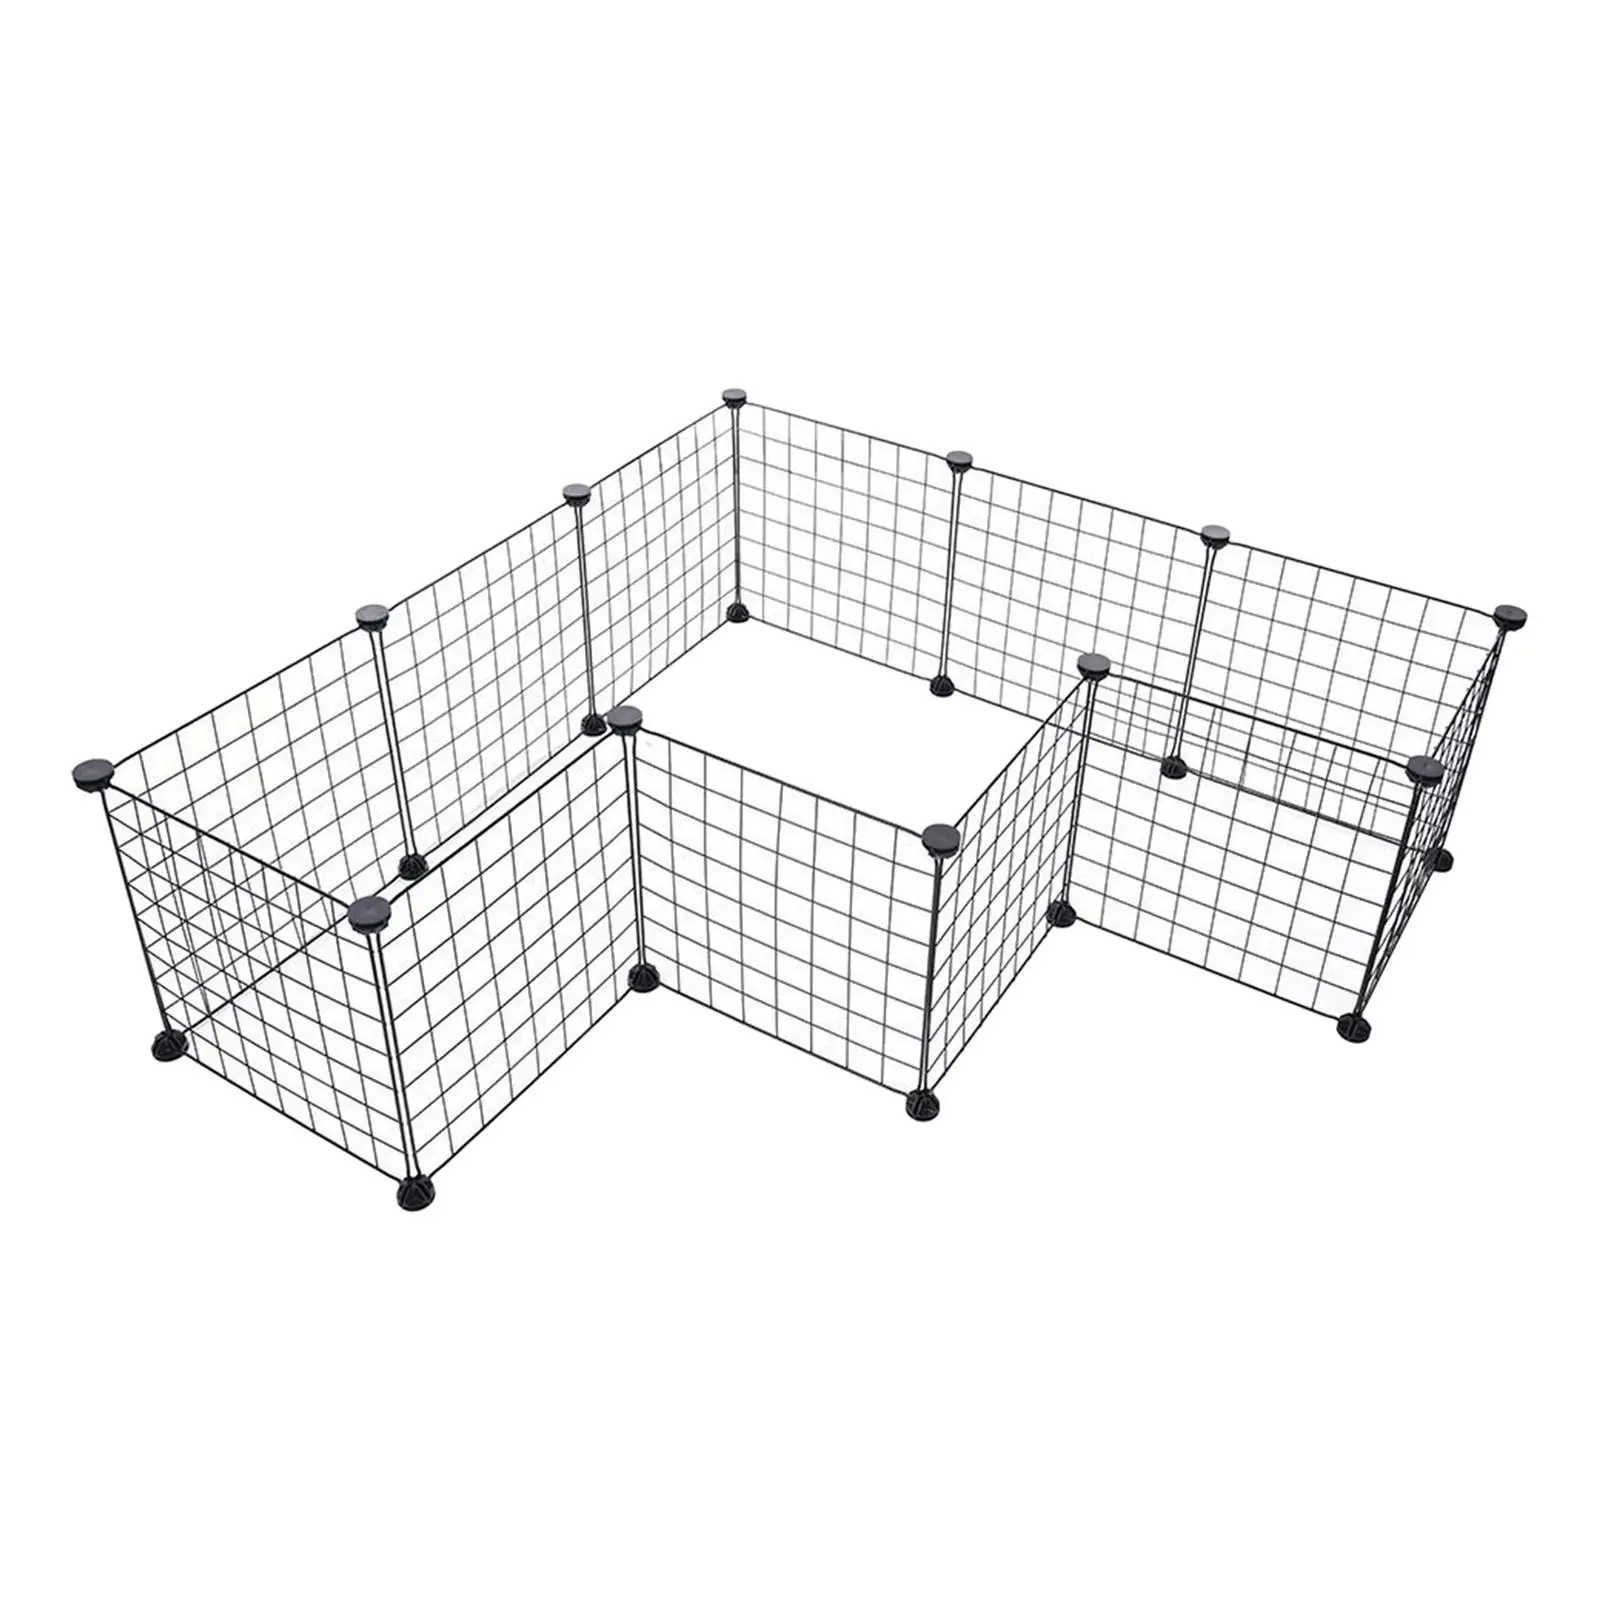 Dog Playpen Indoor Puppy Playpen Pet Fence for Small Dogs Cats Bunny Hamster